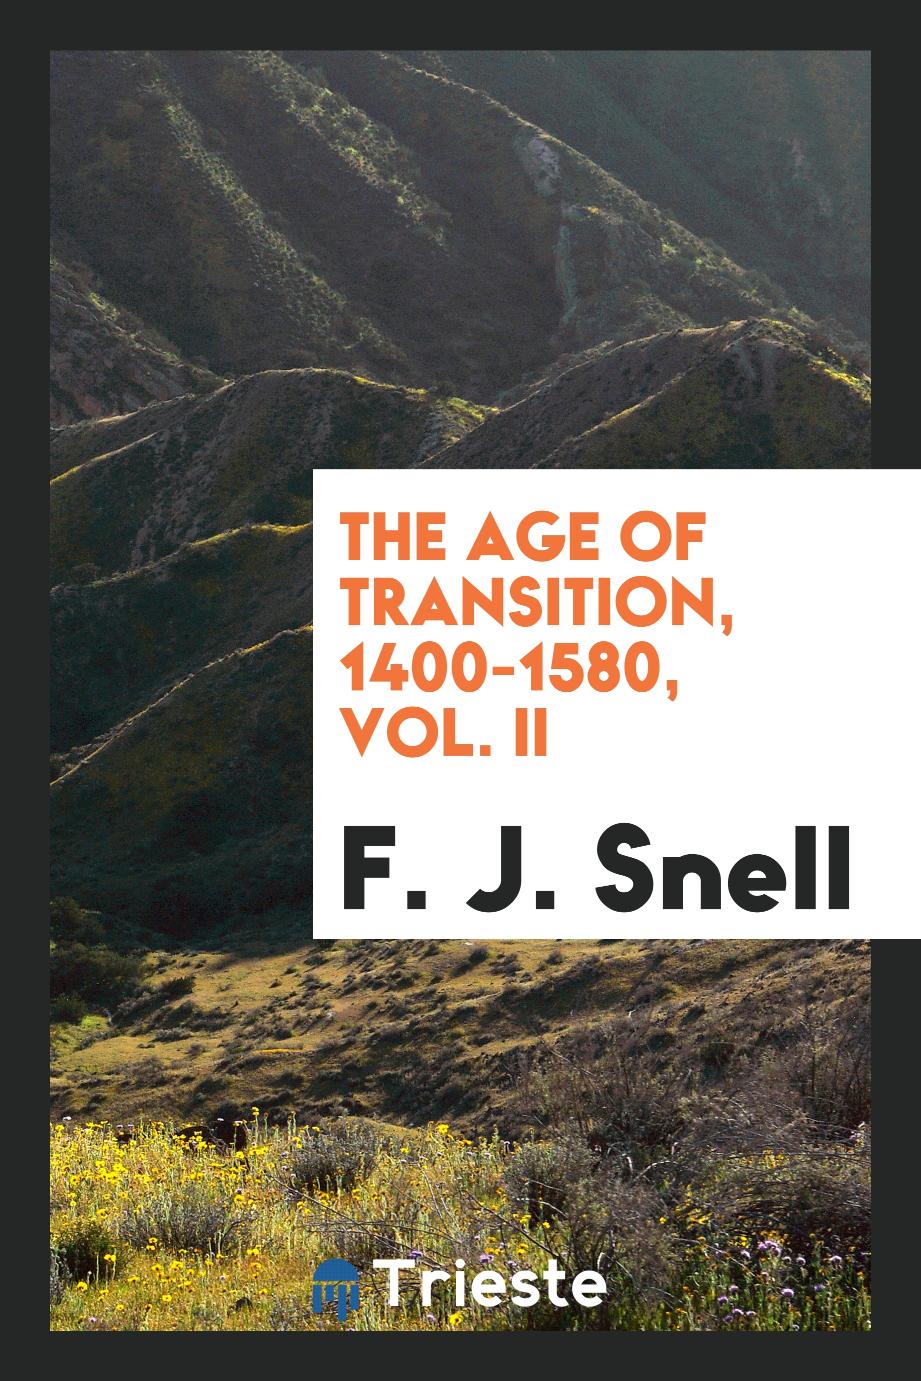 The age of transition, 1400-1580, Vol. II